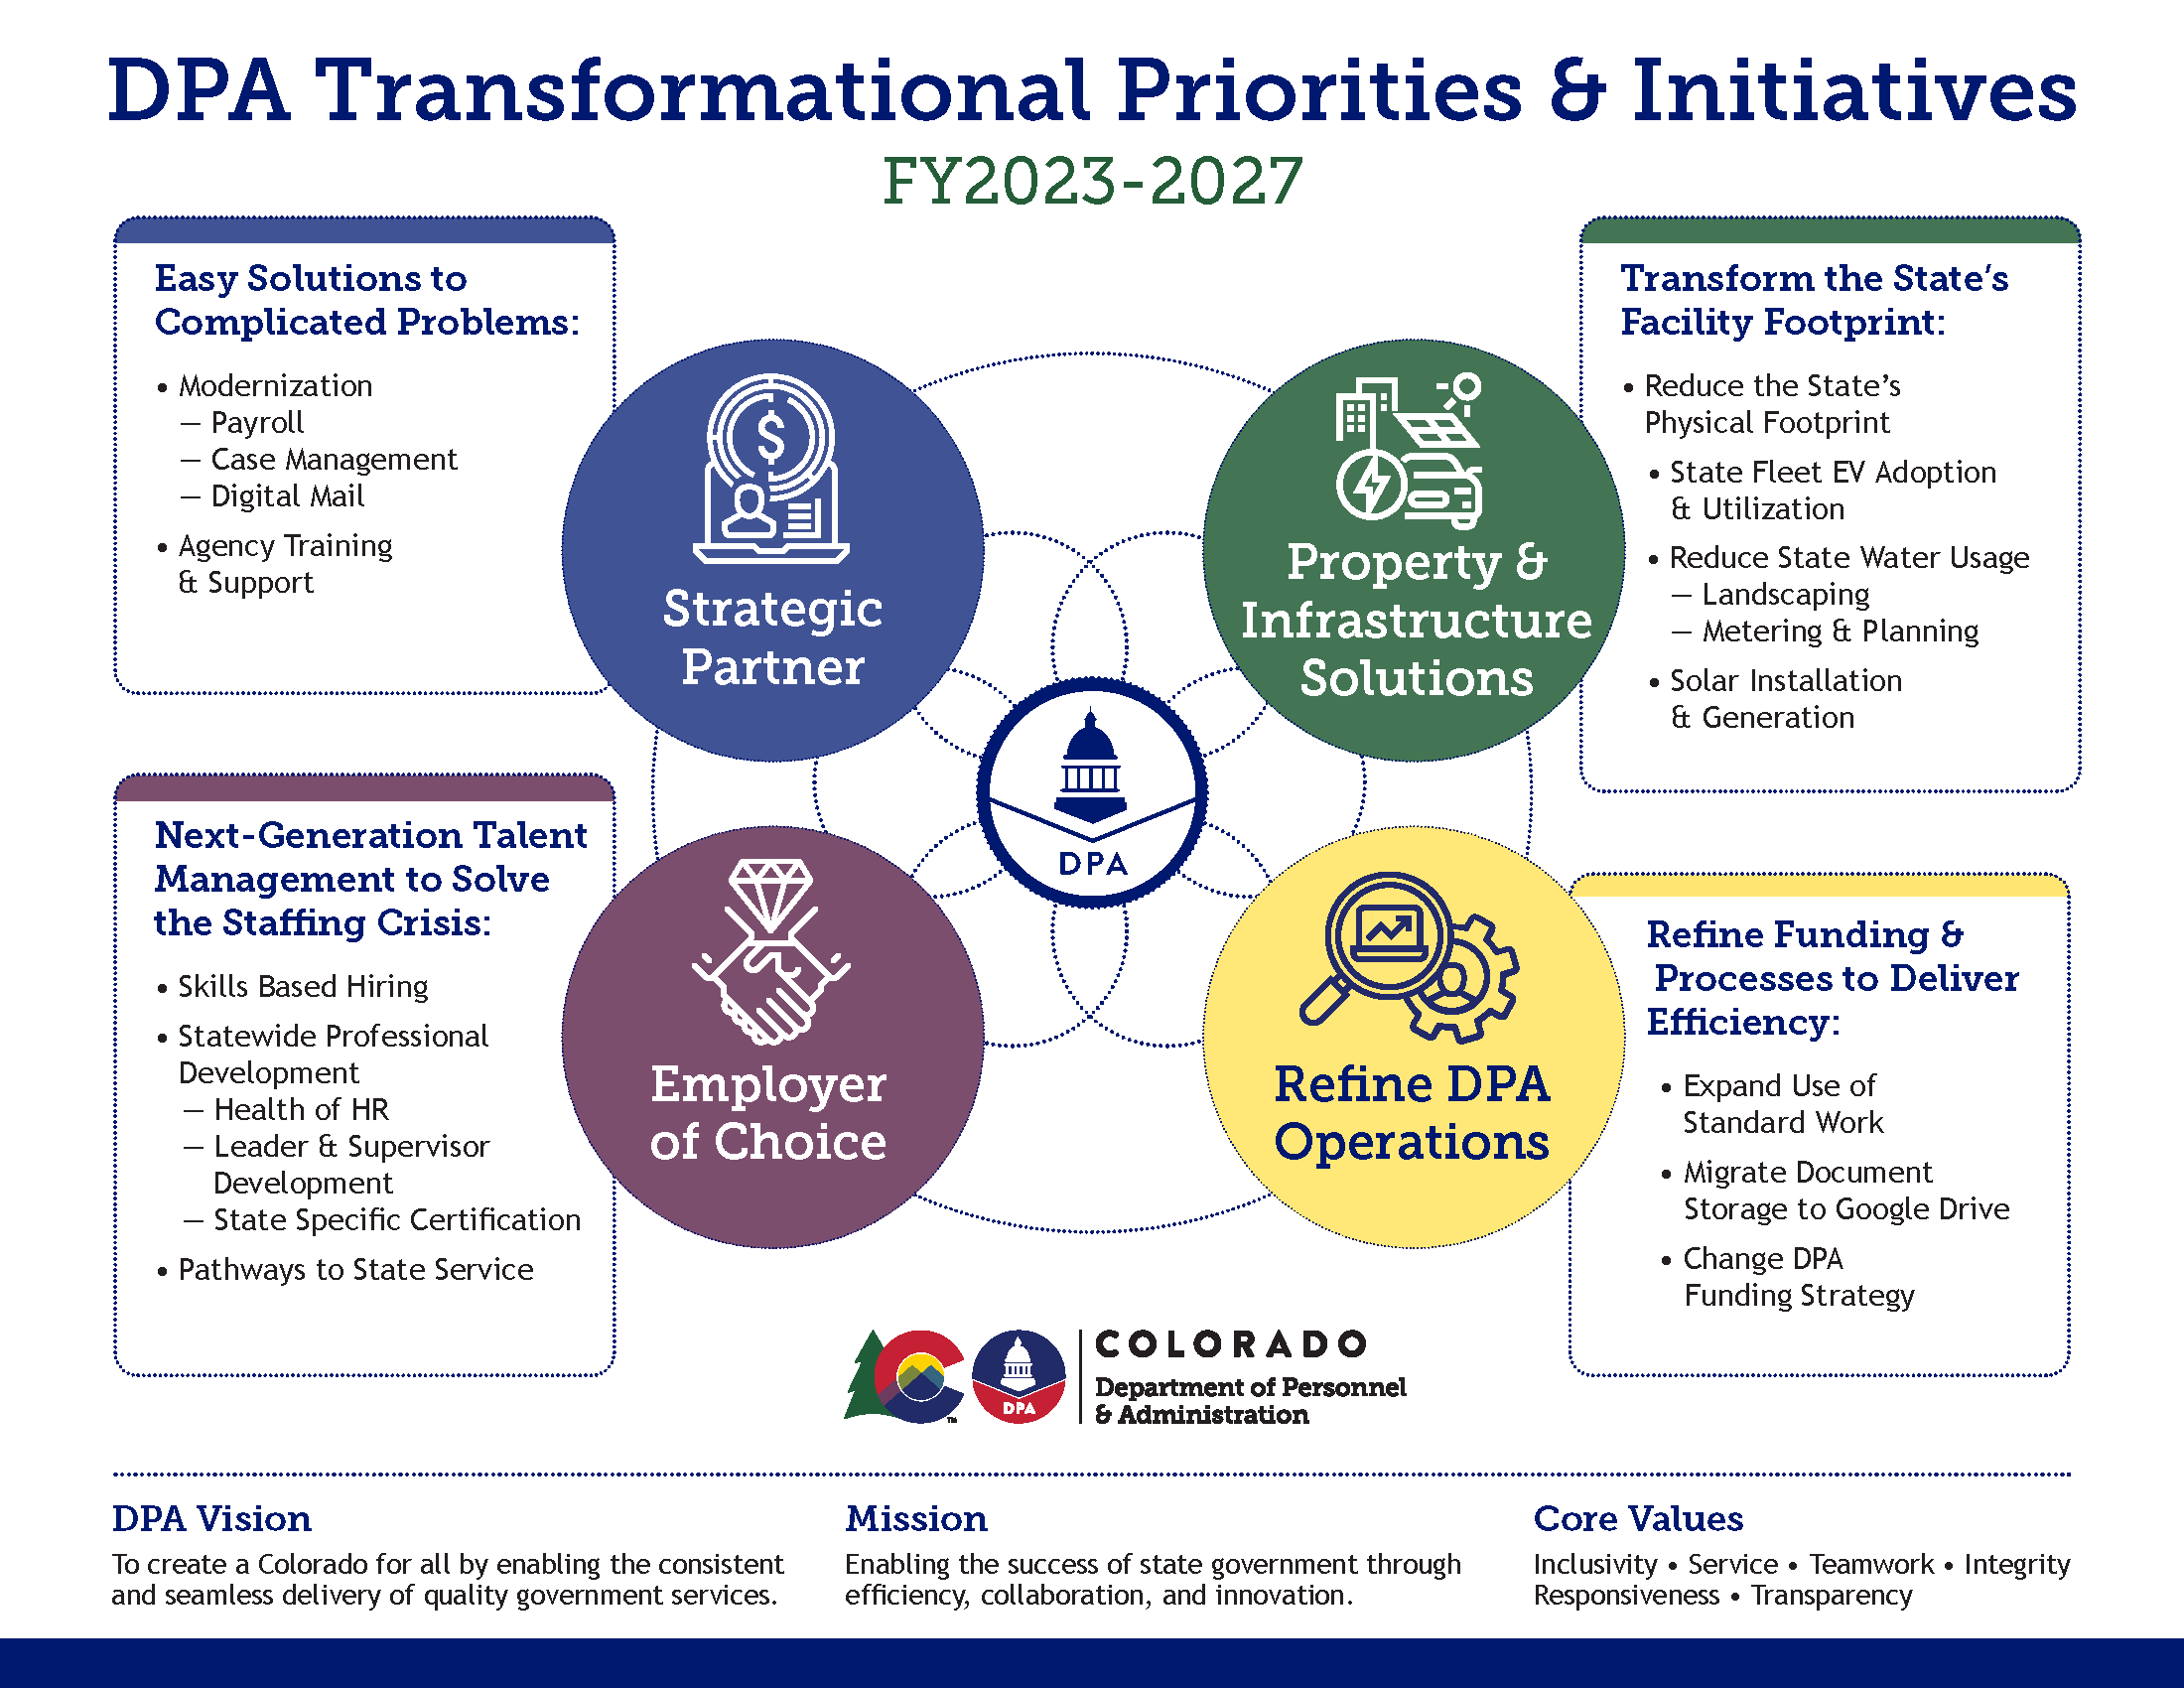 Infographic showing strategic partner, property and infrastructure solutions, employer of choice, and refine DPA operations